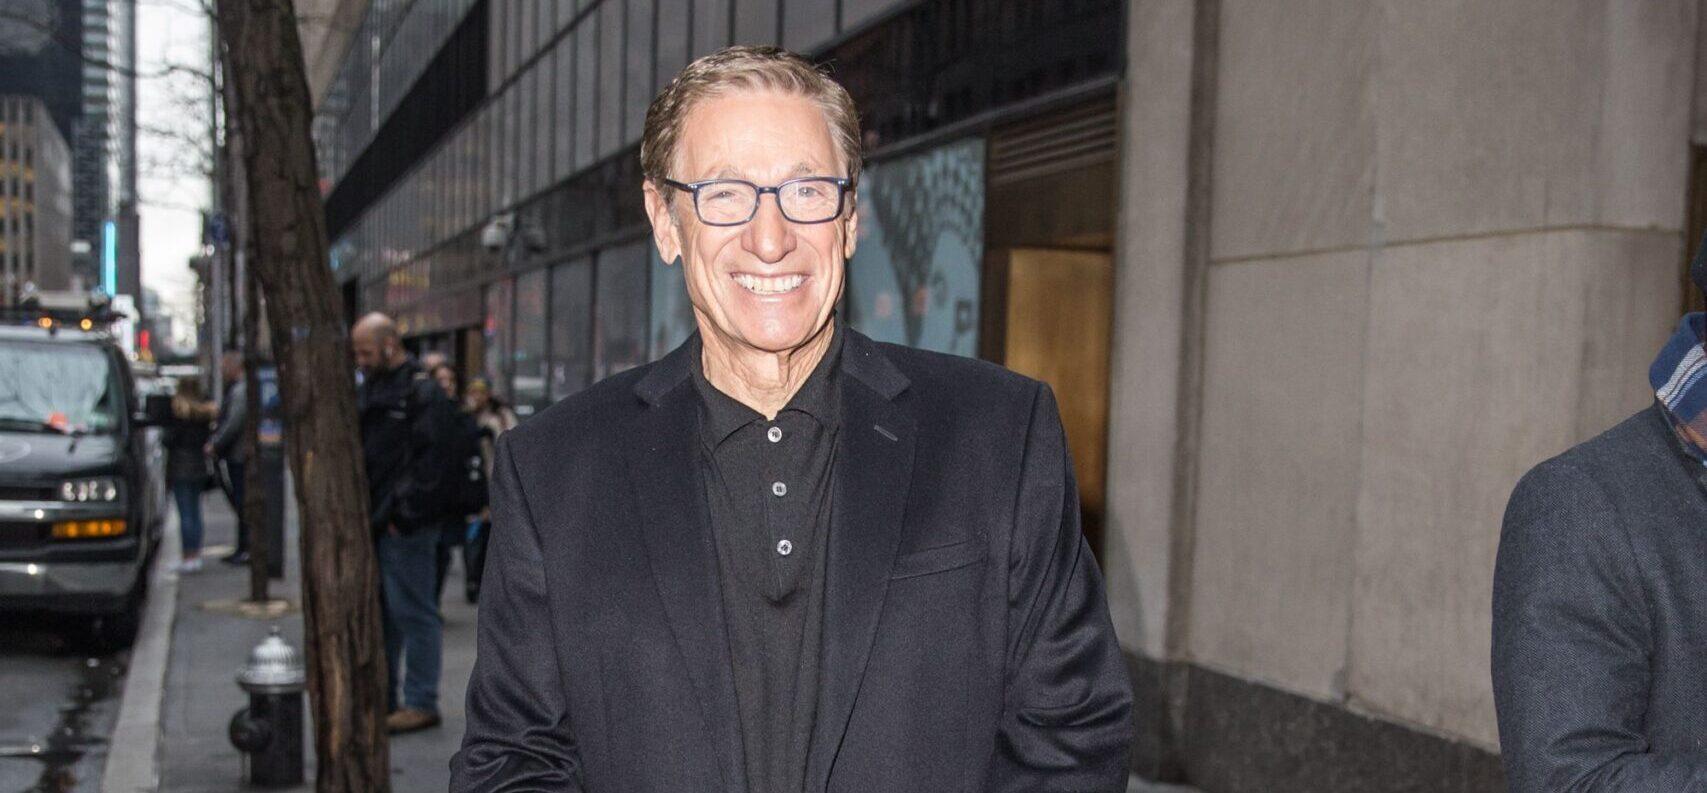 Maury Povich’s Baby Daddy At Home Testing Kits Available